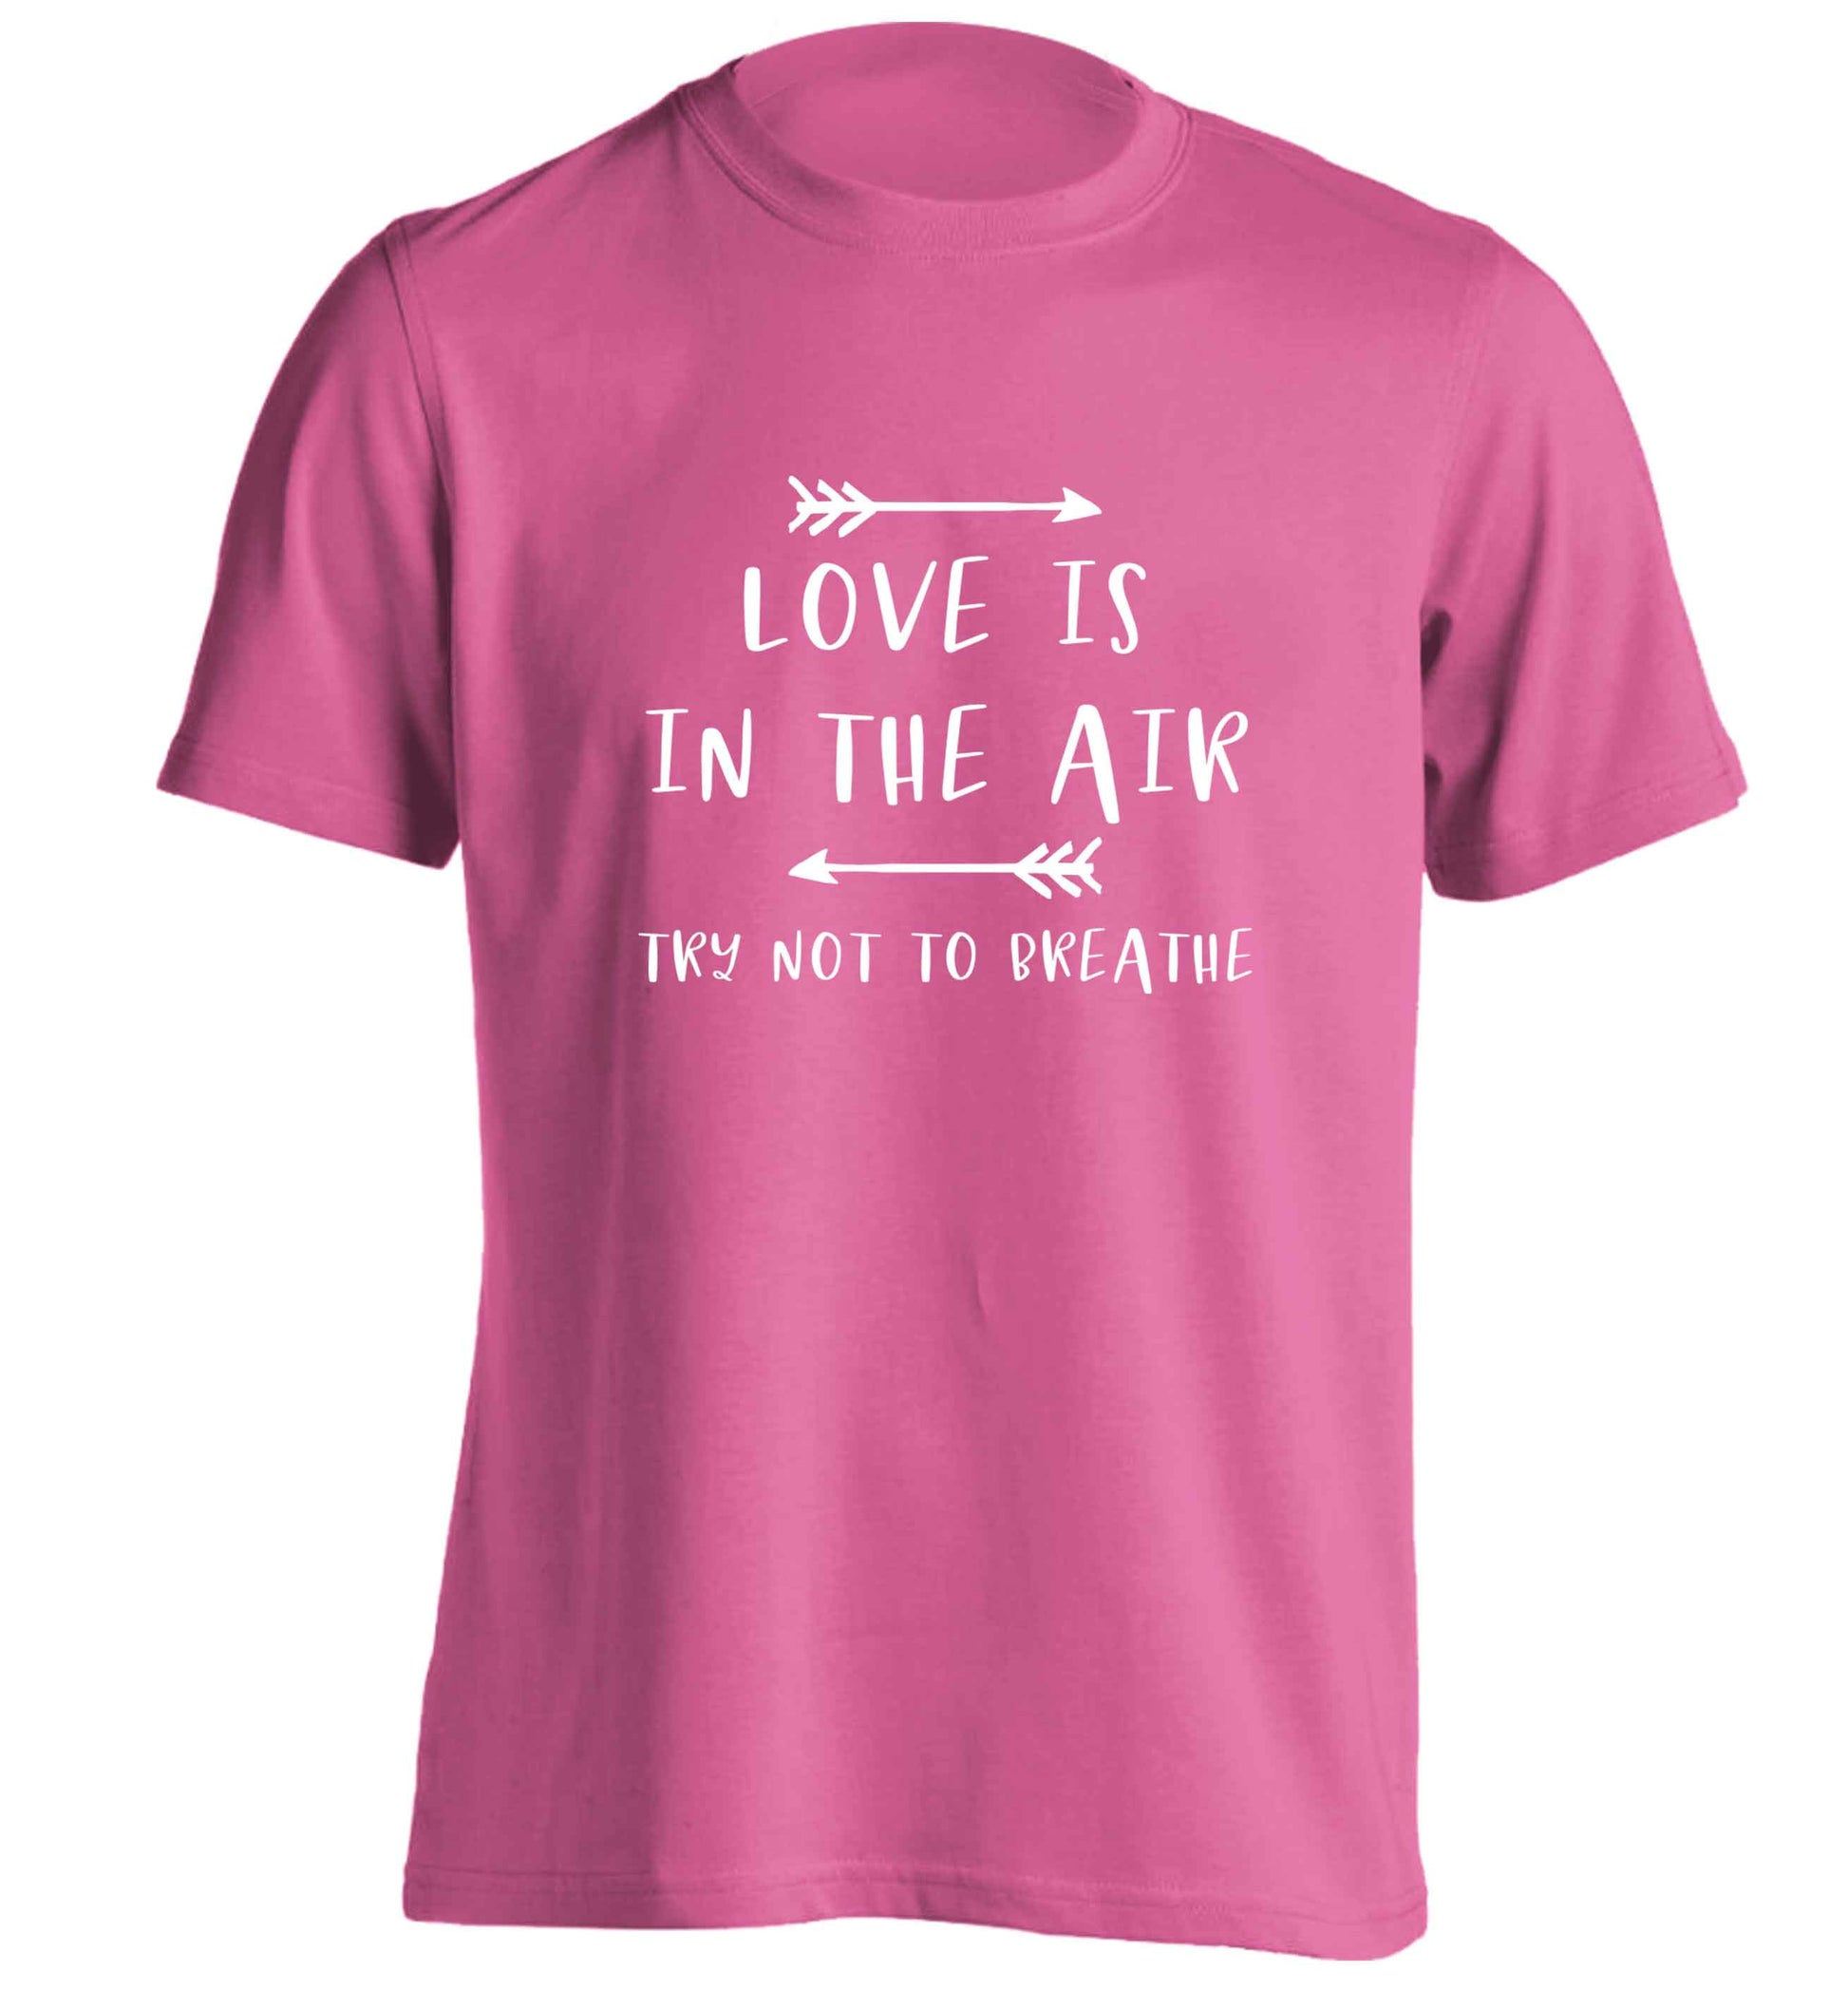 Love is in the air try not to breathe adults unisex pink Tshirt 2XL